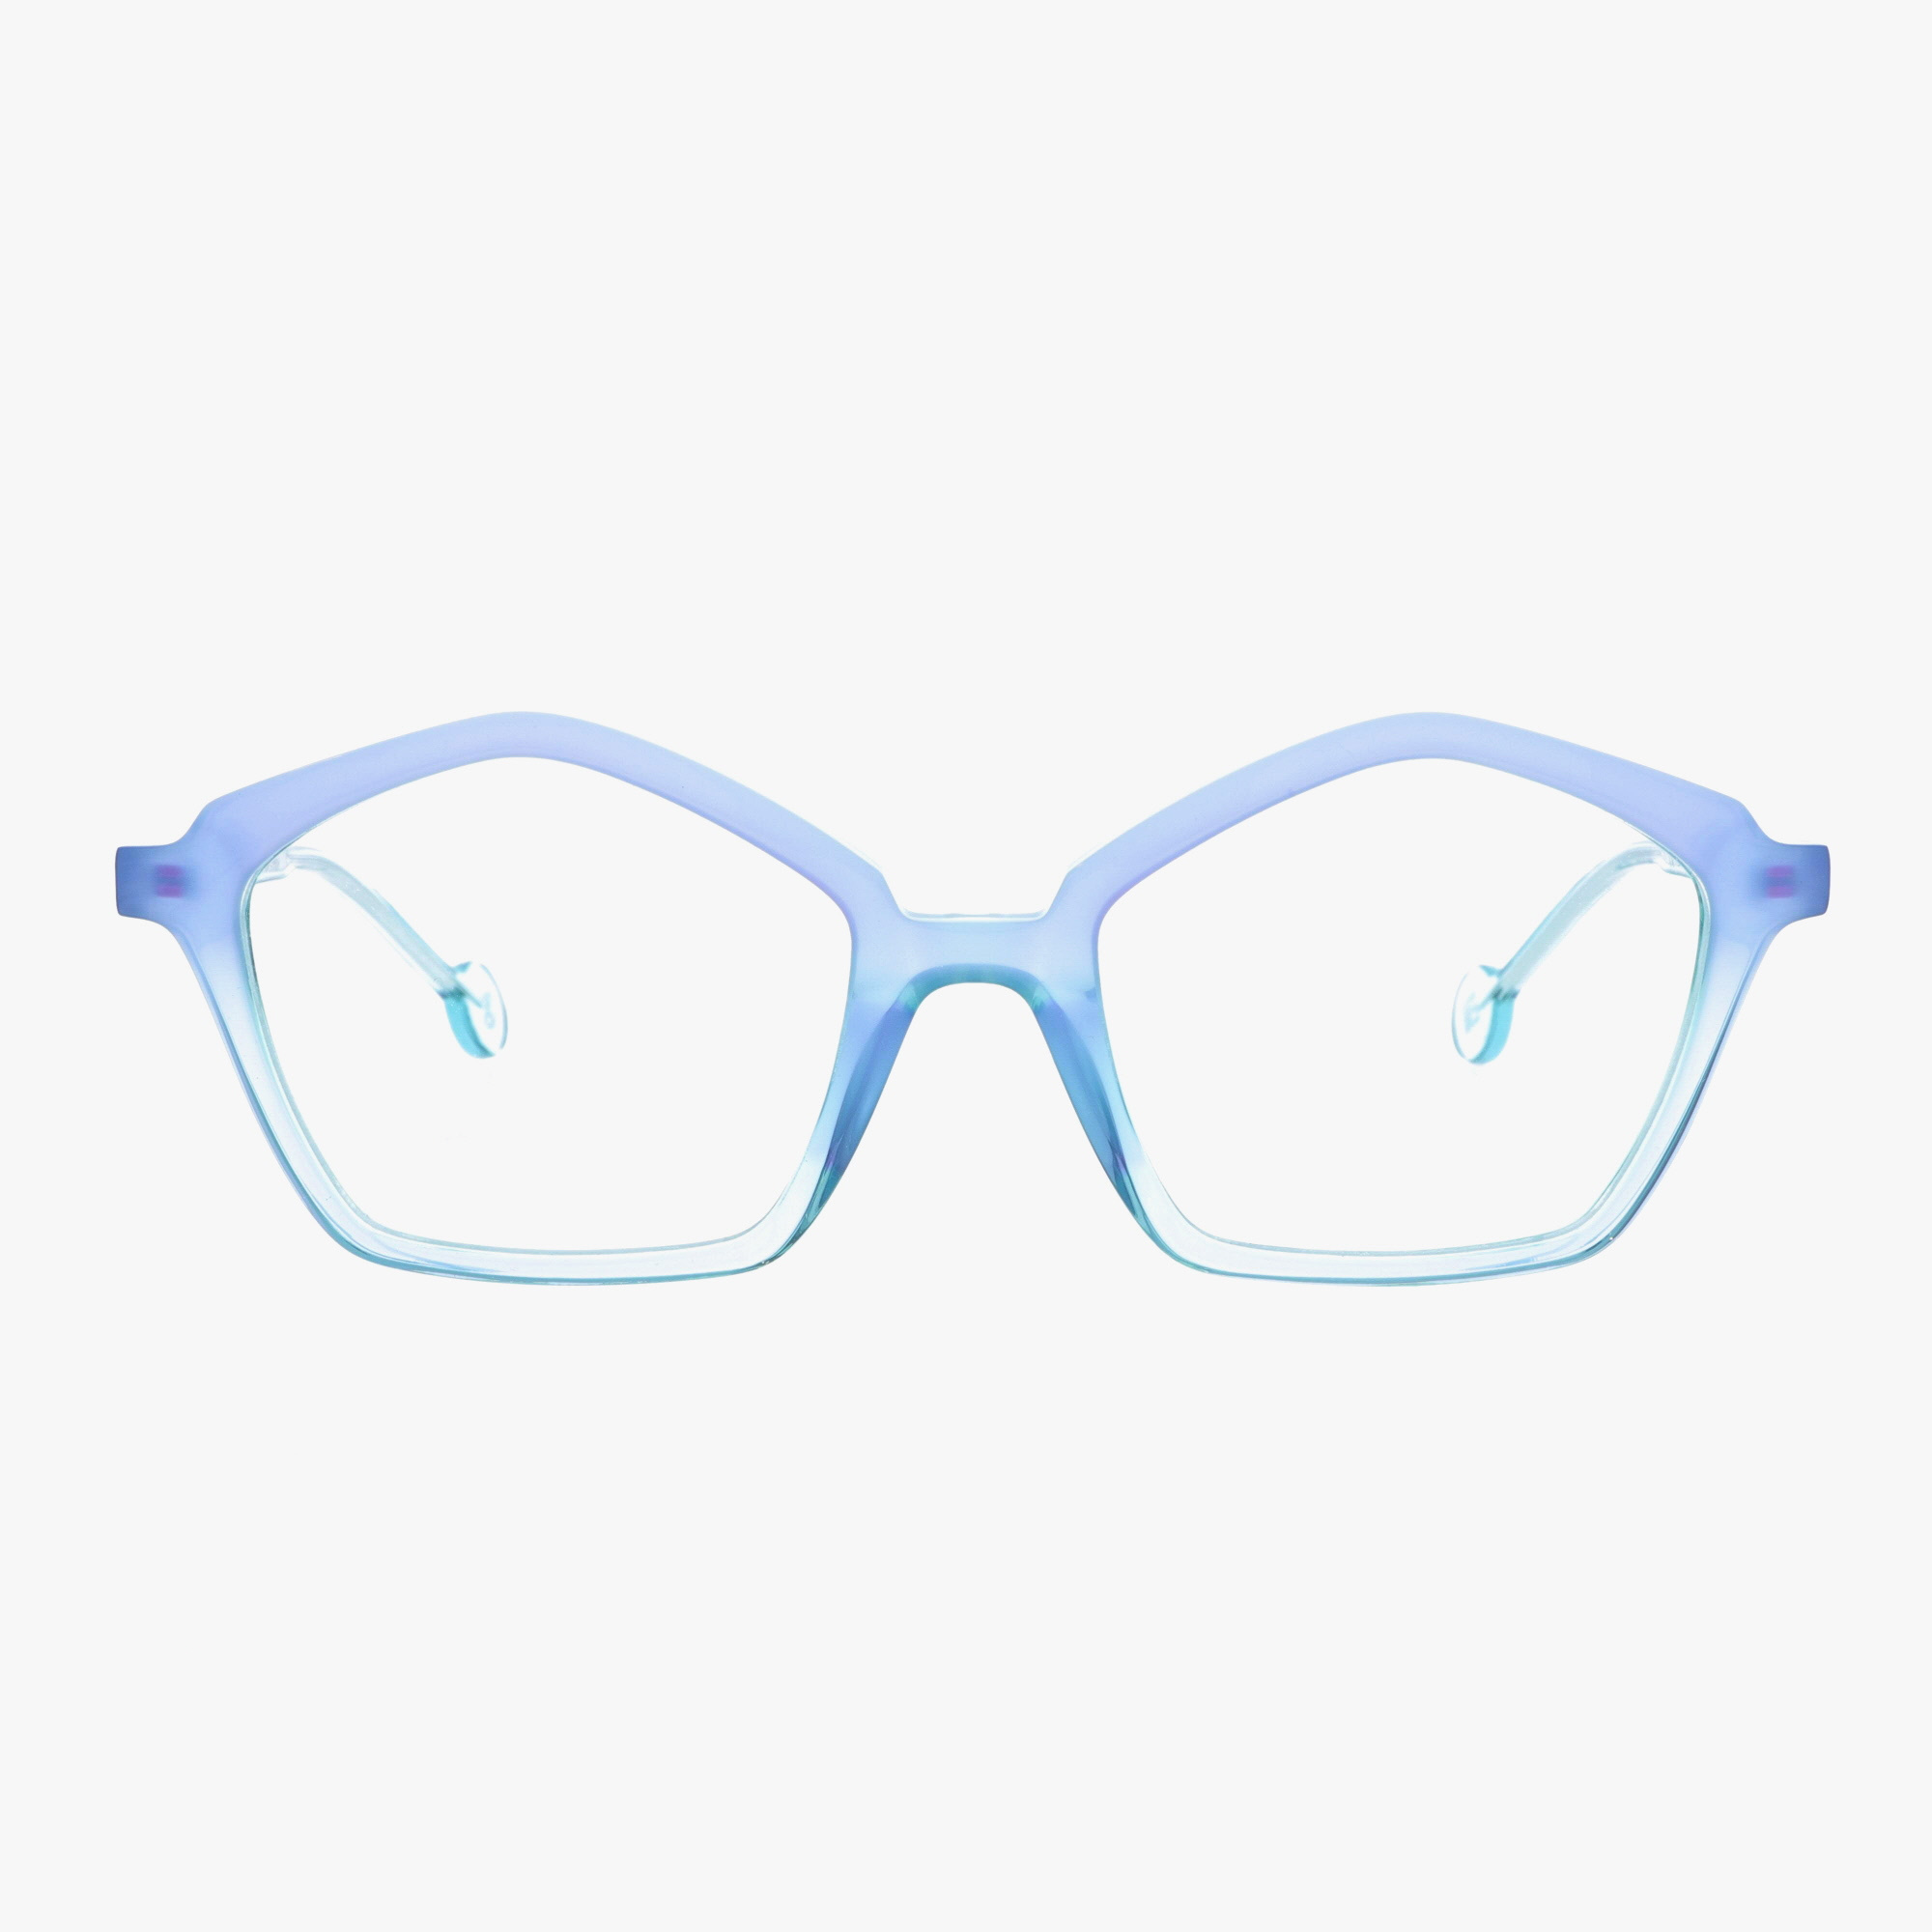 L.A.EYEWORKS / WHIRLY BIRD / MOON WATER